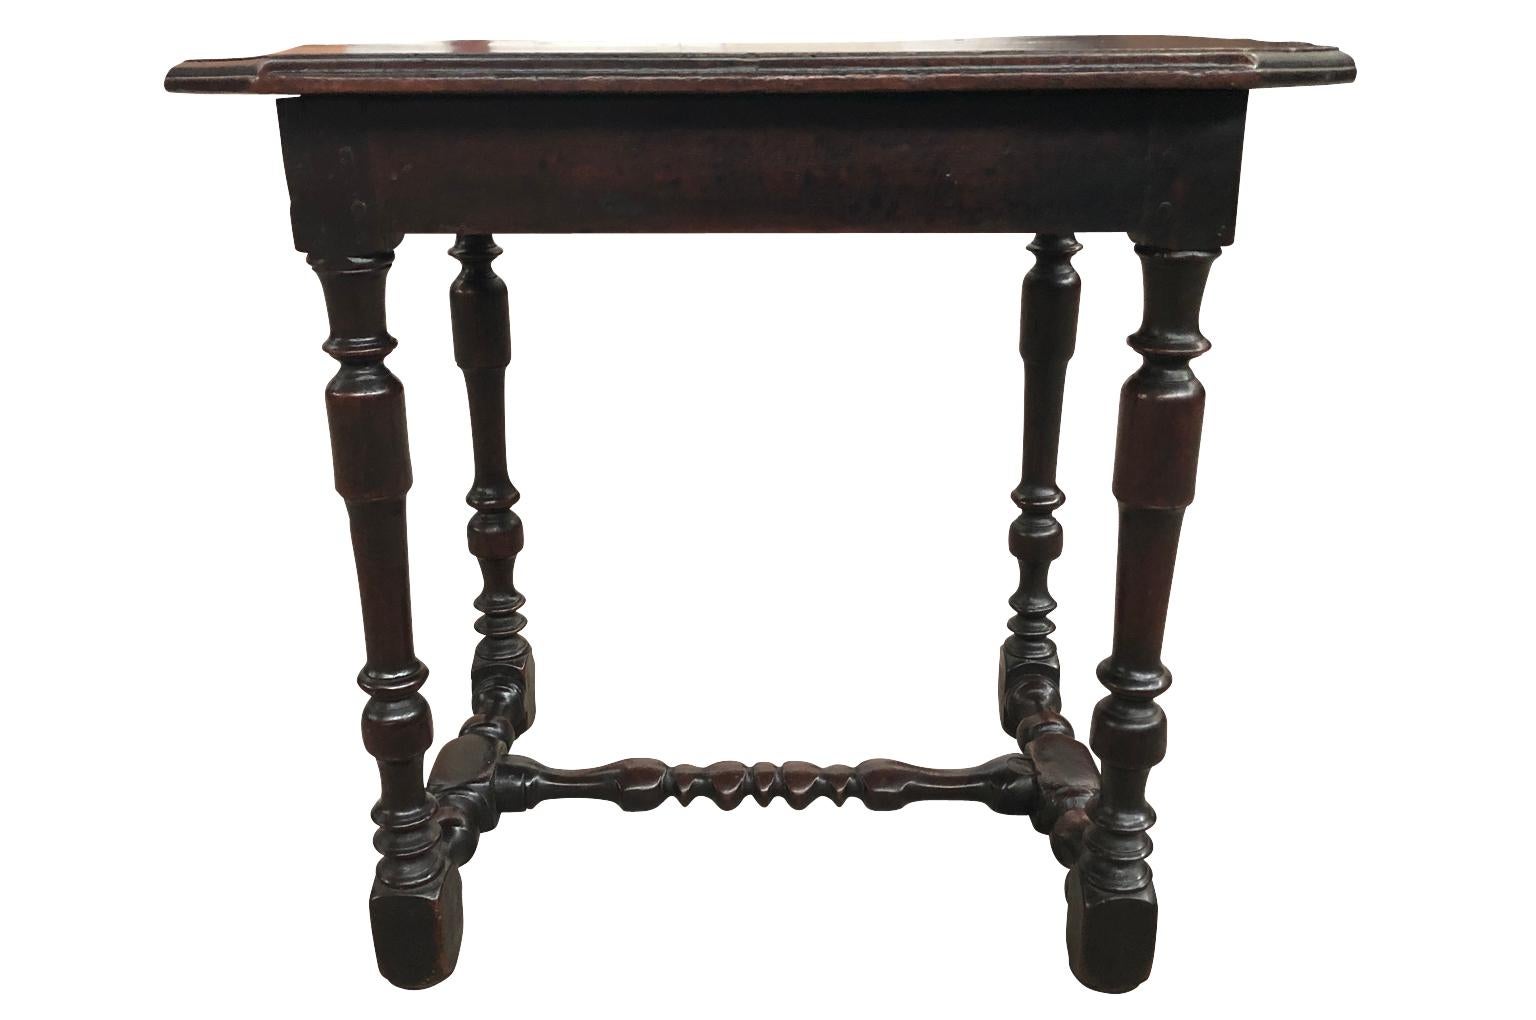 A very charming French Louis XIII style side table, end table from the South of France. Beautifully constructed from stunning walnut with a wonderfully shaped top, nicely turned legs and stretcher and a single drawer. Wonderful patina, warm and